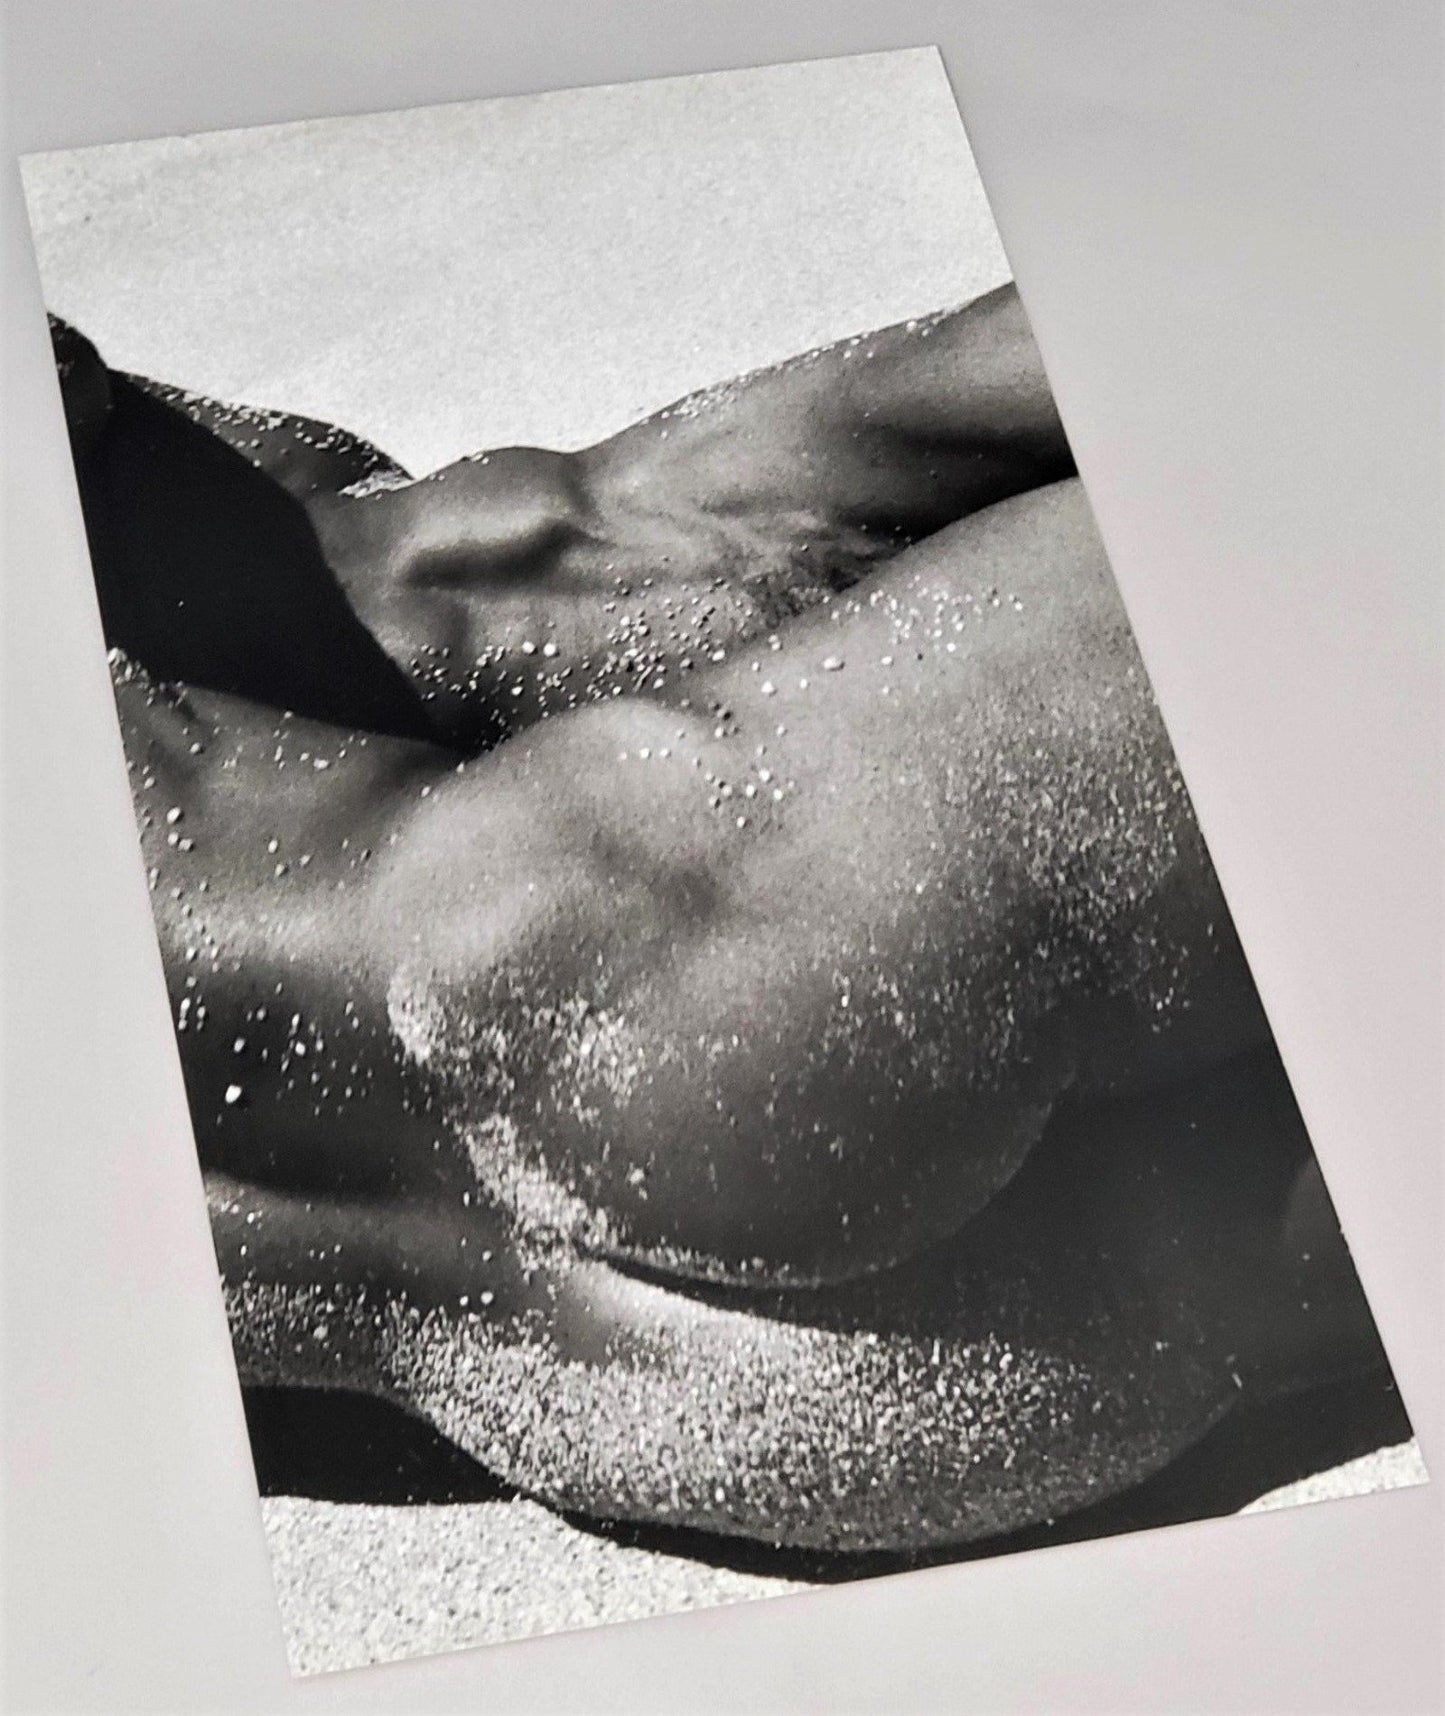 Original Herb Ritts photography page featured in 1991 Duo hardcover book